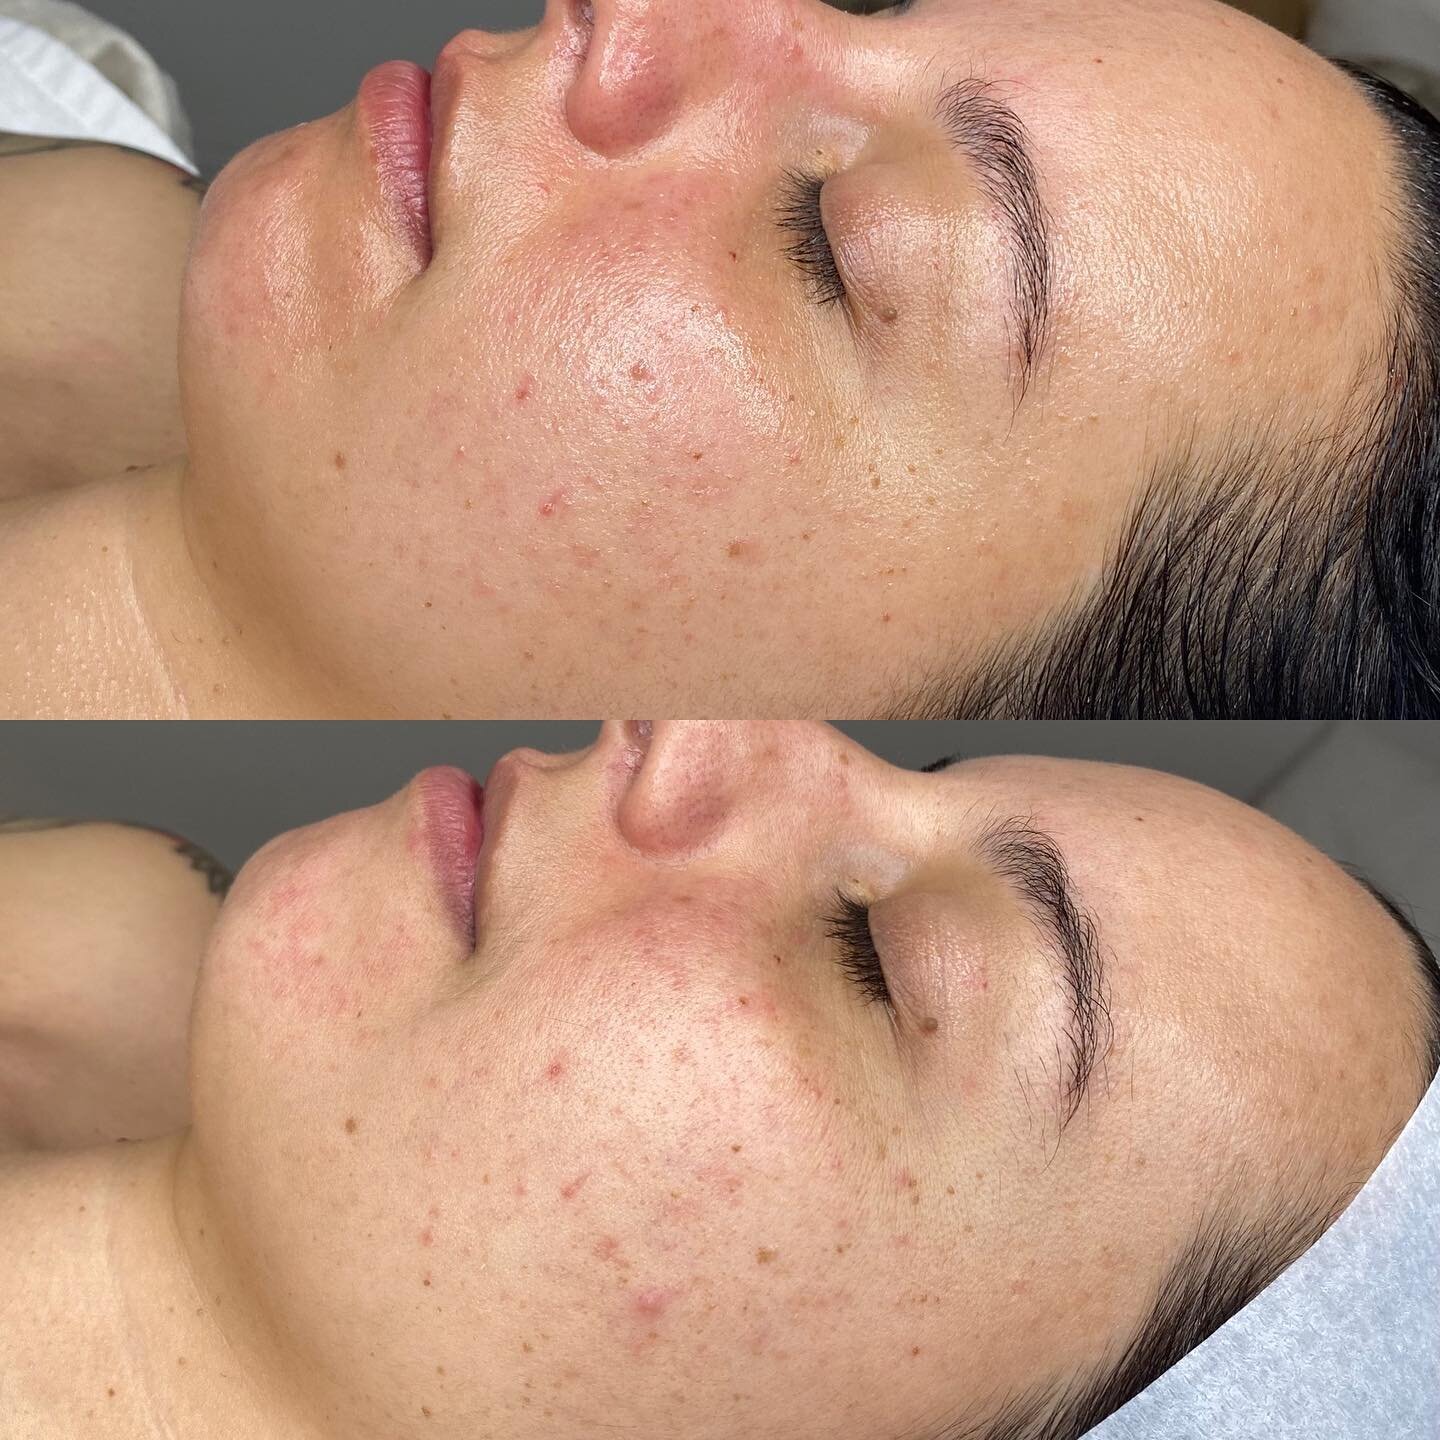 Okay wow the power of LED is realll, these pictures are with just 3 LEDs and home care. You can literally do 3 LEDs in one week and create this change within your skin 🤯.
Pigment, scaring and breakouts have reduced and skin is looking more healthy a